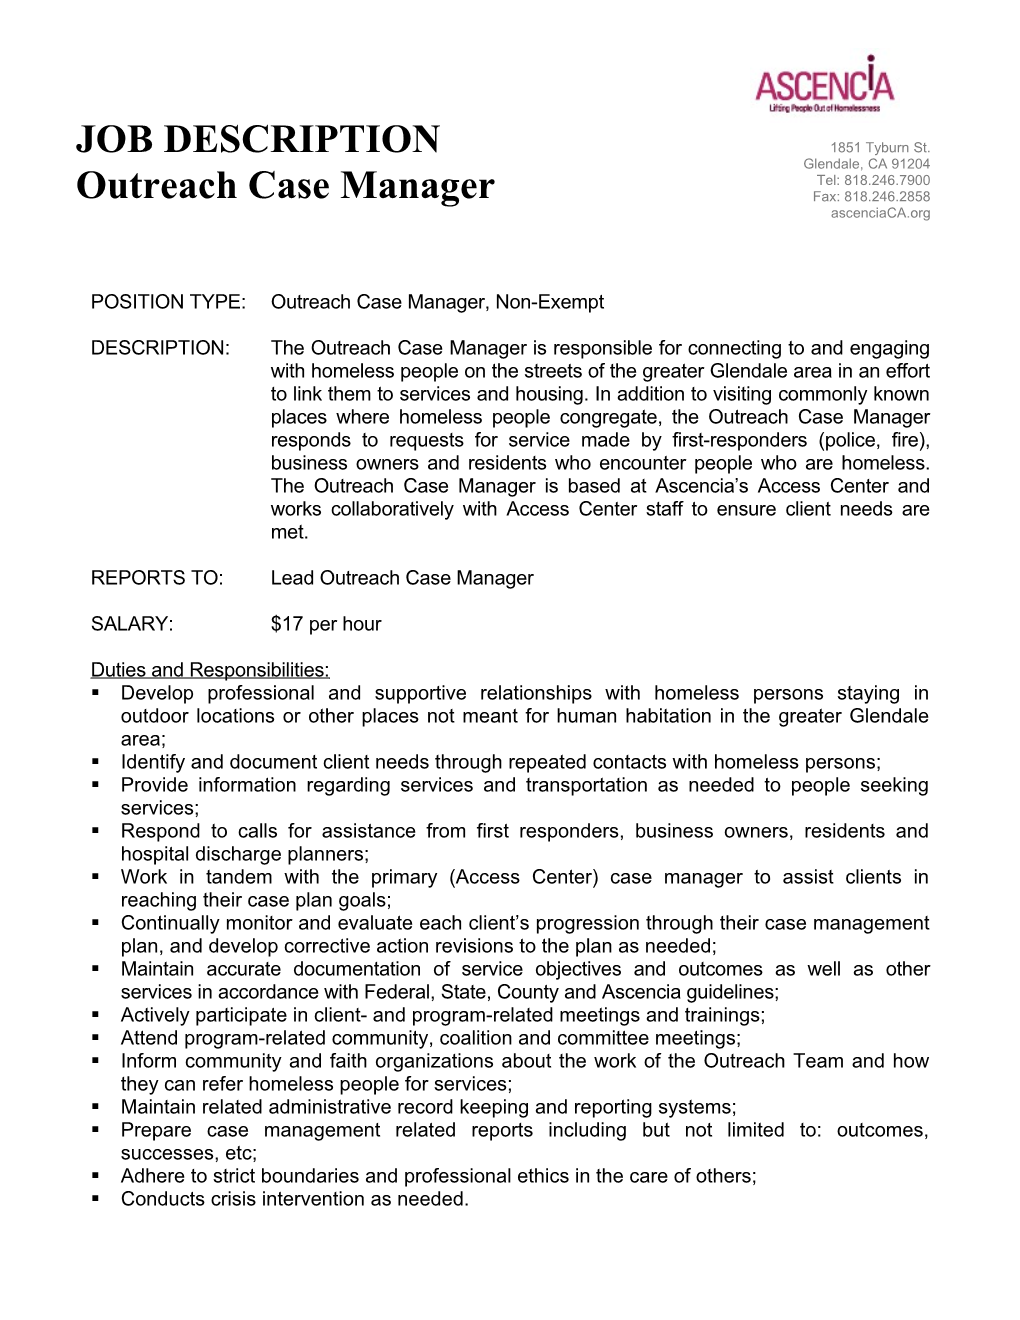 POSITION TYPE:Outreach Case Manager, Non-Exempt